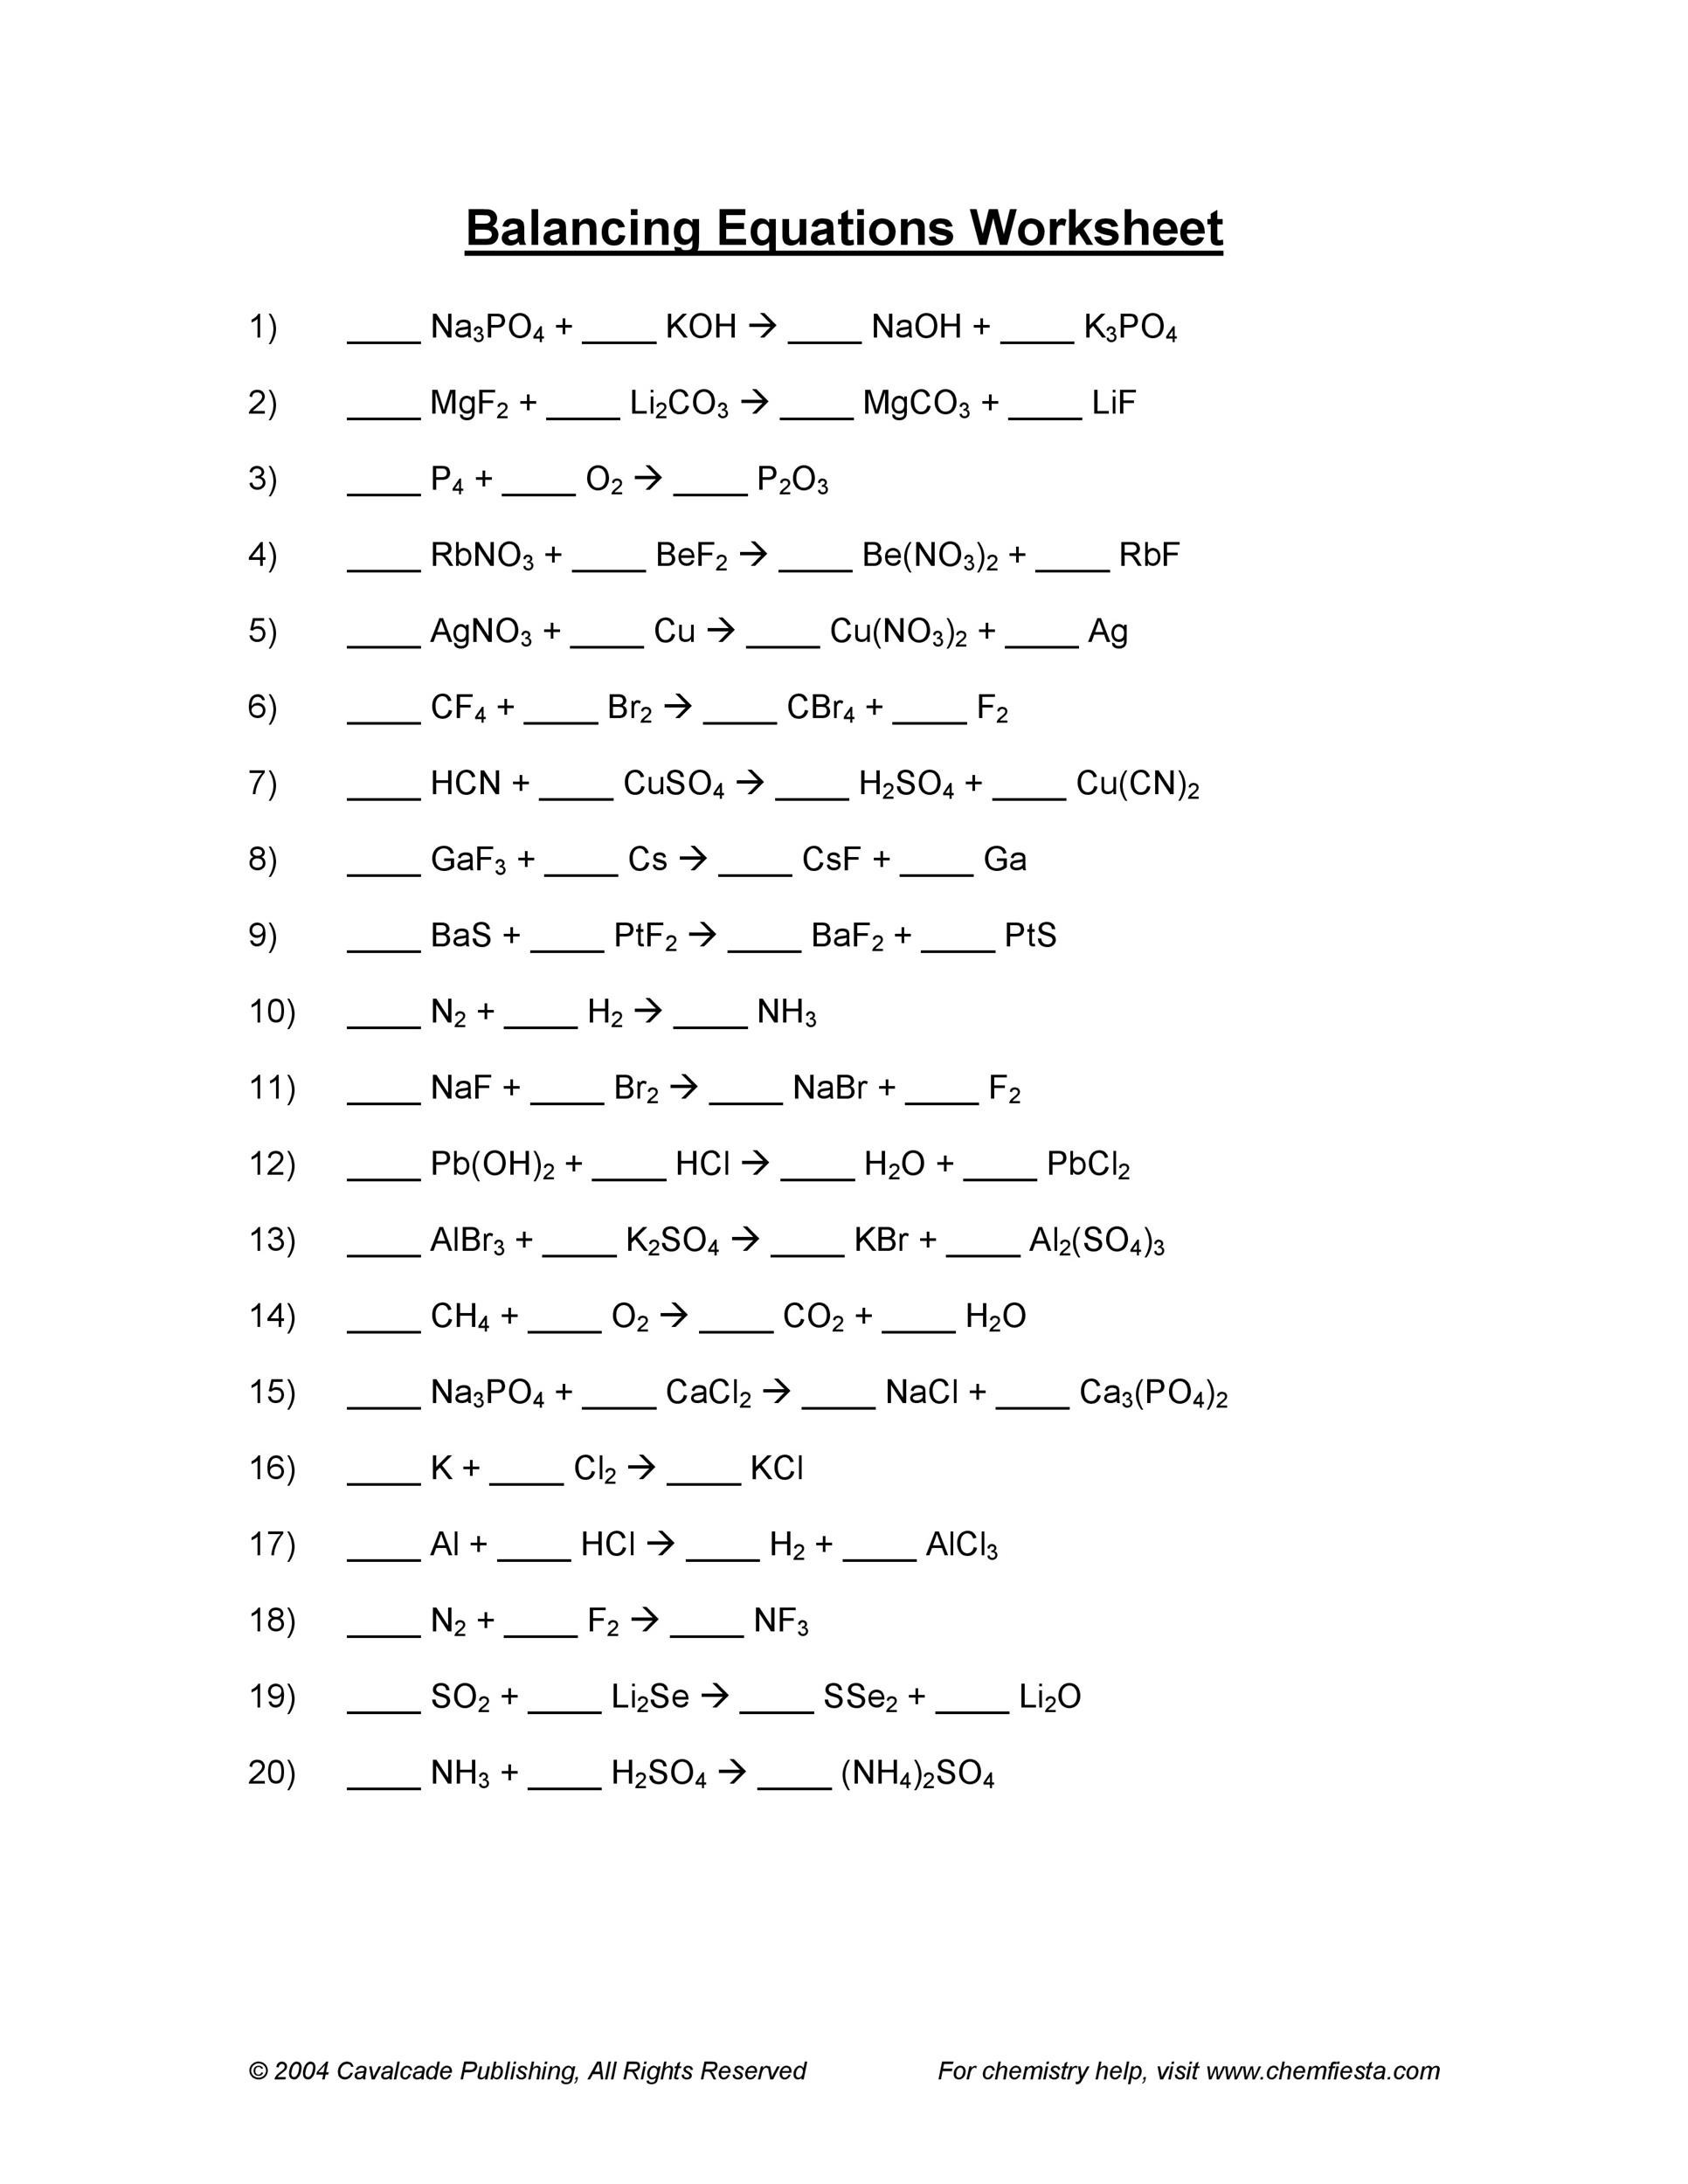 Detectar Robar a fluir 49 Balancing Chemical Equations Worksheets [with Answers]